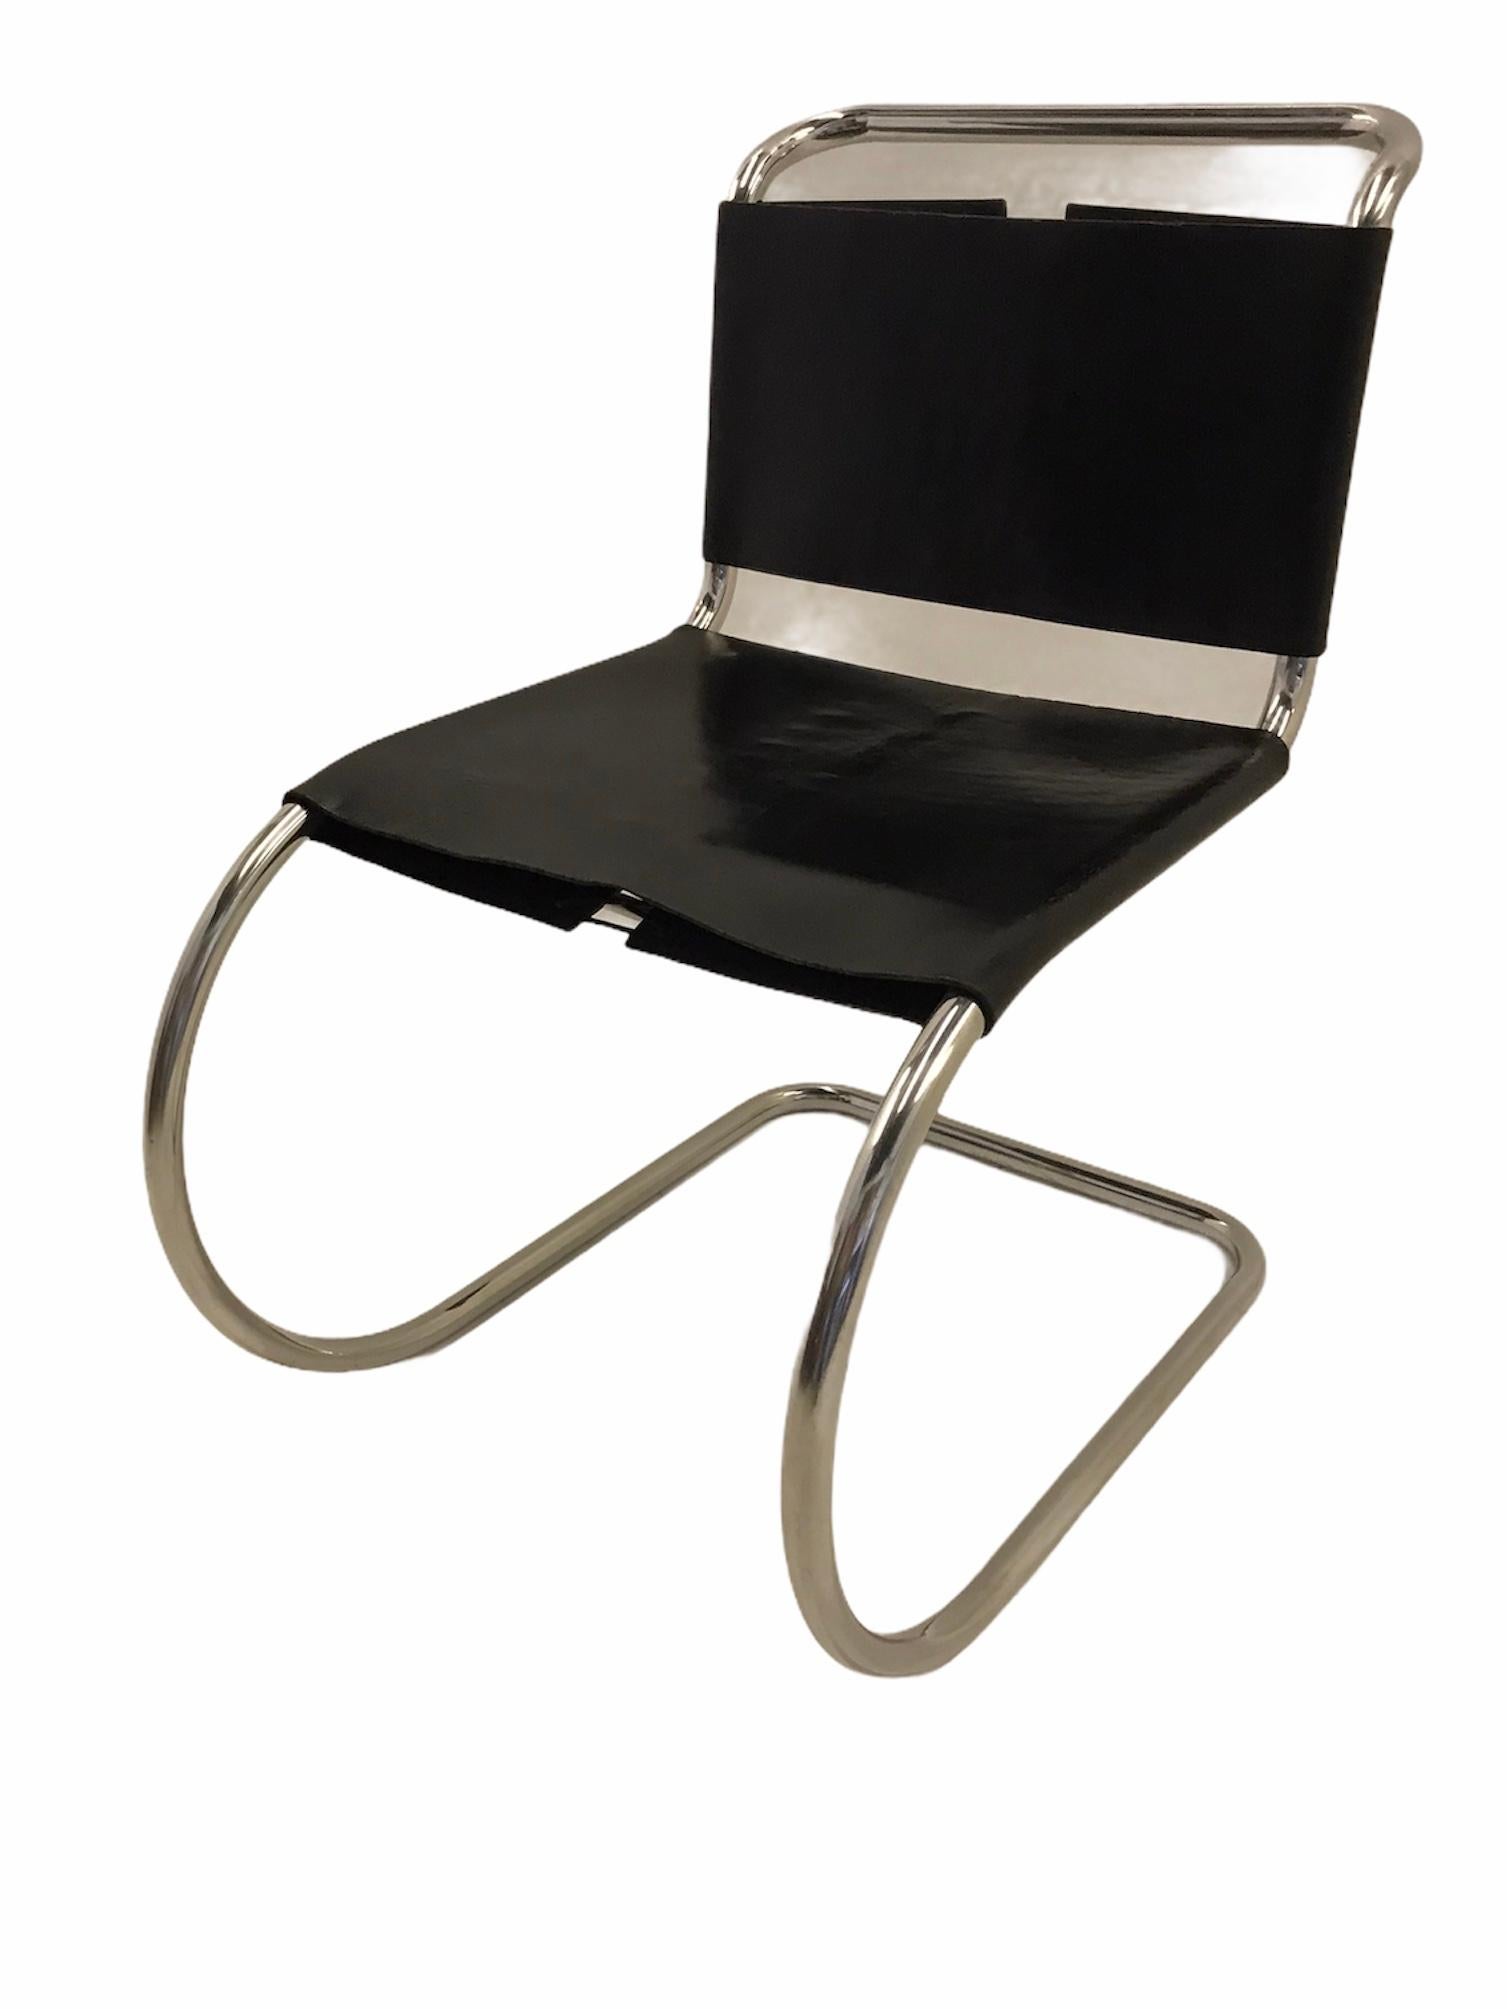 .Produced in the 1960s, Classic laced black leather and chrome Mies van der Rohe MR10 cantilever chair by Knoll International. New cord lacing on the back and seat. Retains the Knoll label.
The graceful, elegant, and beautifully proportioned 